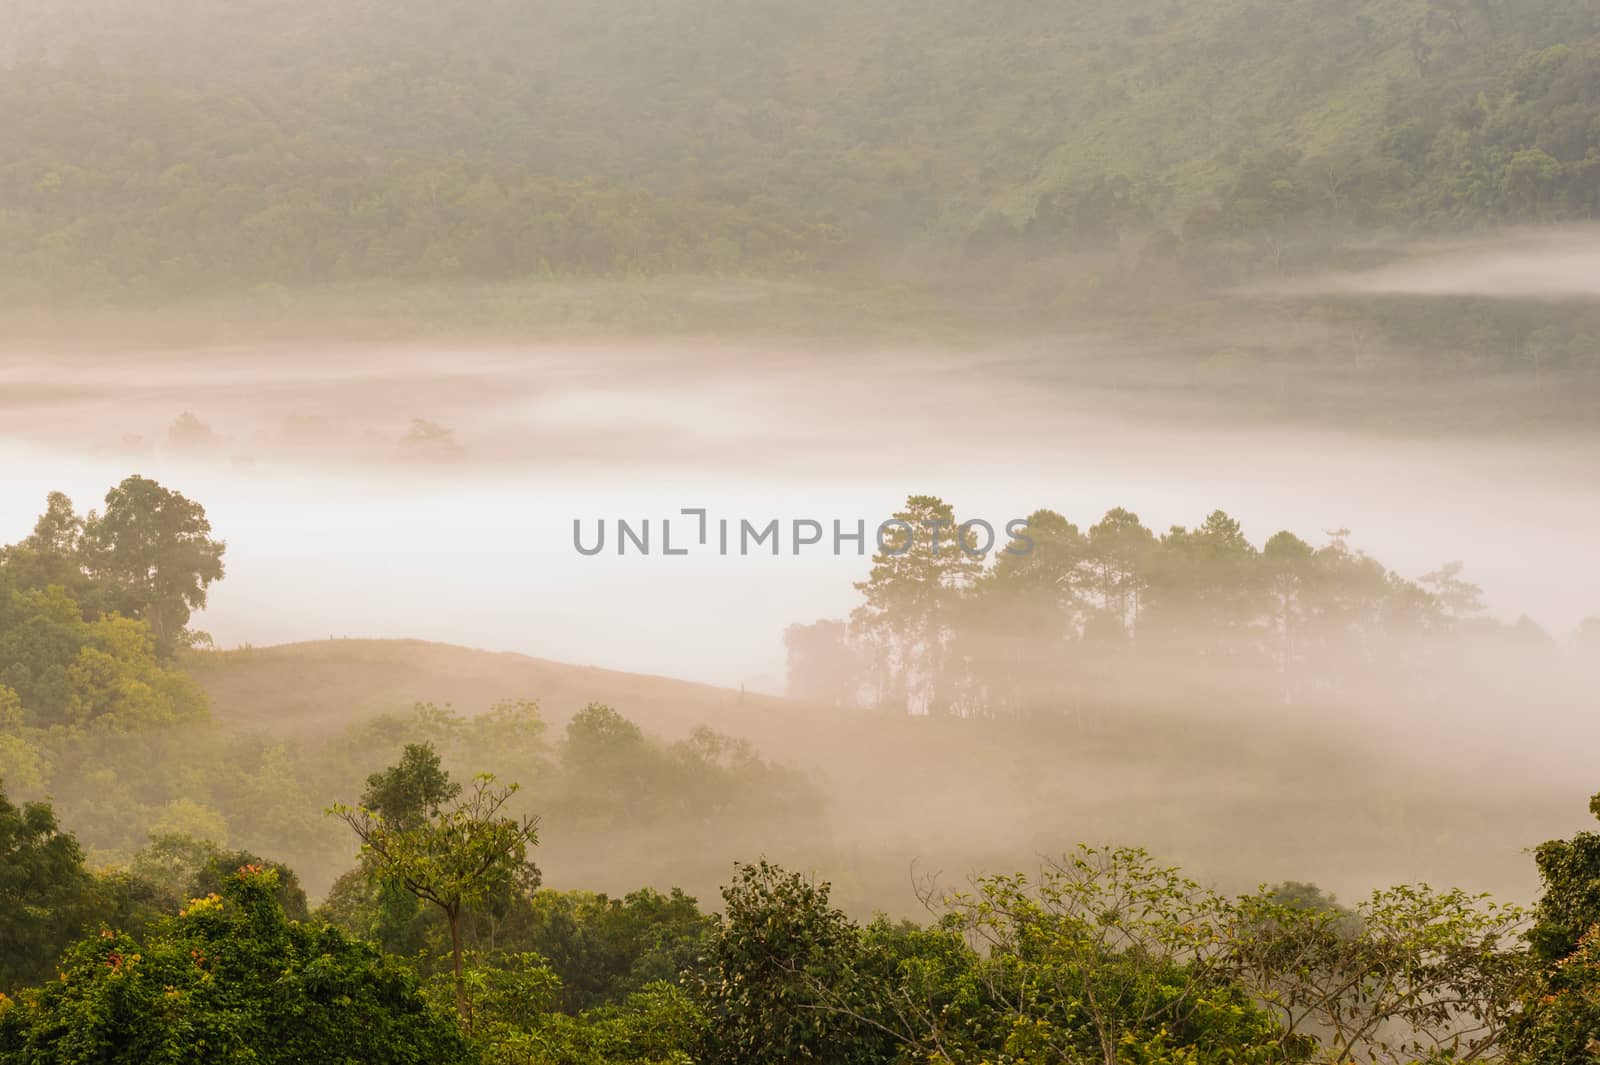 Beautiful misty sunrise on tropical forest mist, north Thailand.